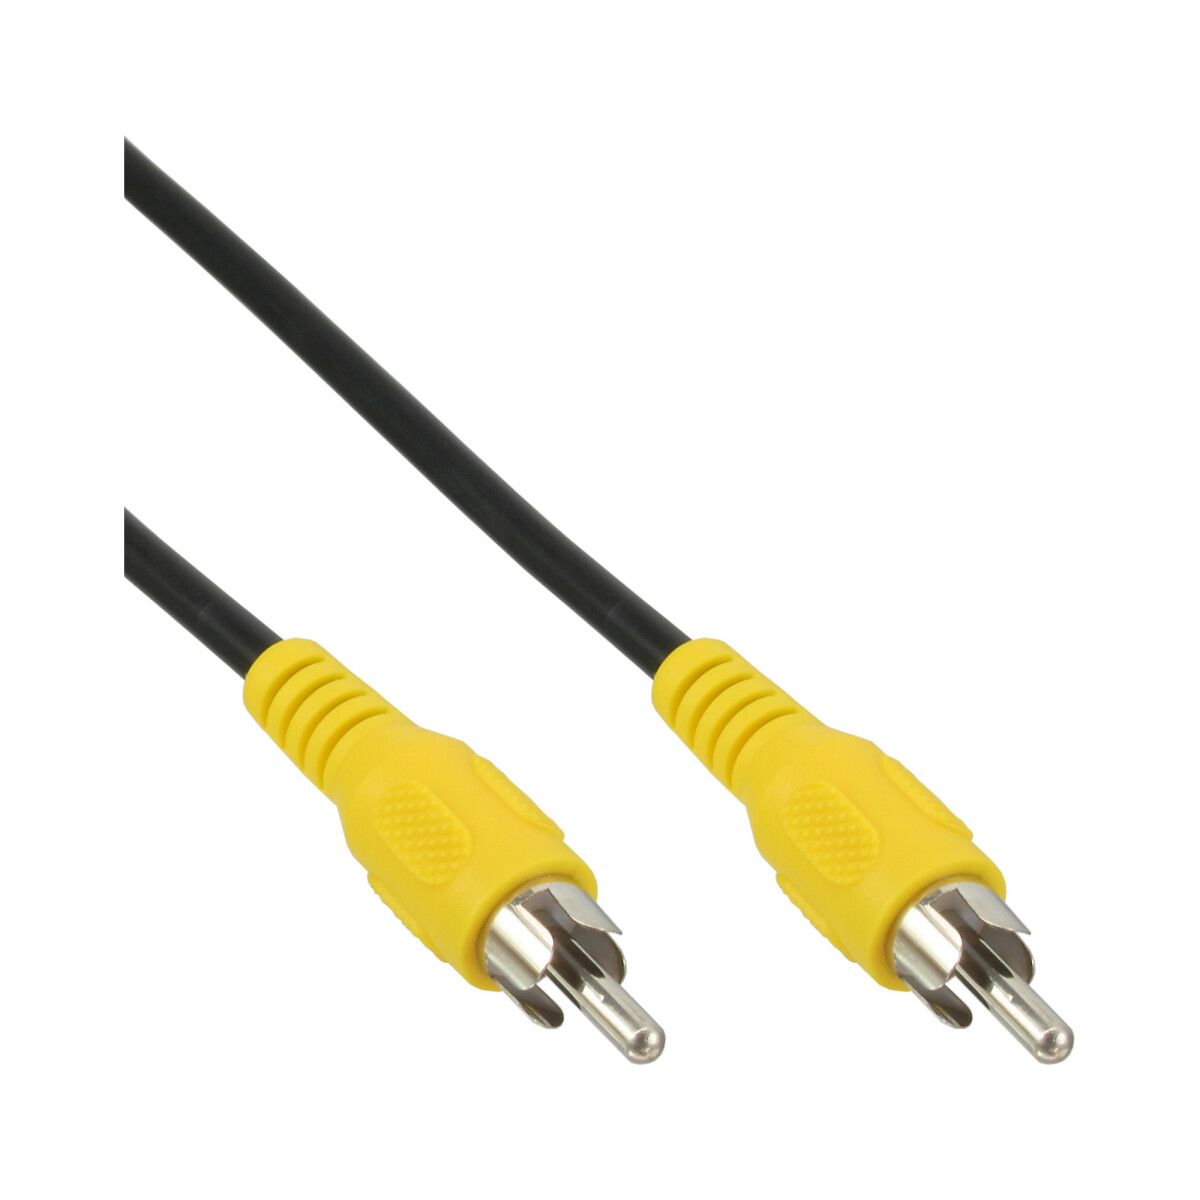 InLine® Video cable,, 1x RCA M/M, yellow plugs, 1m